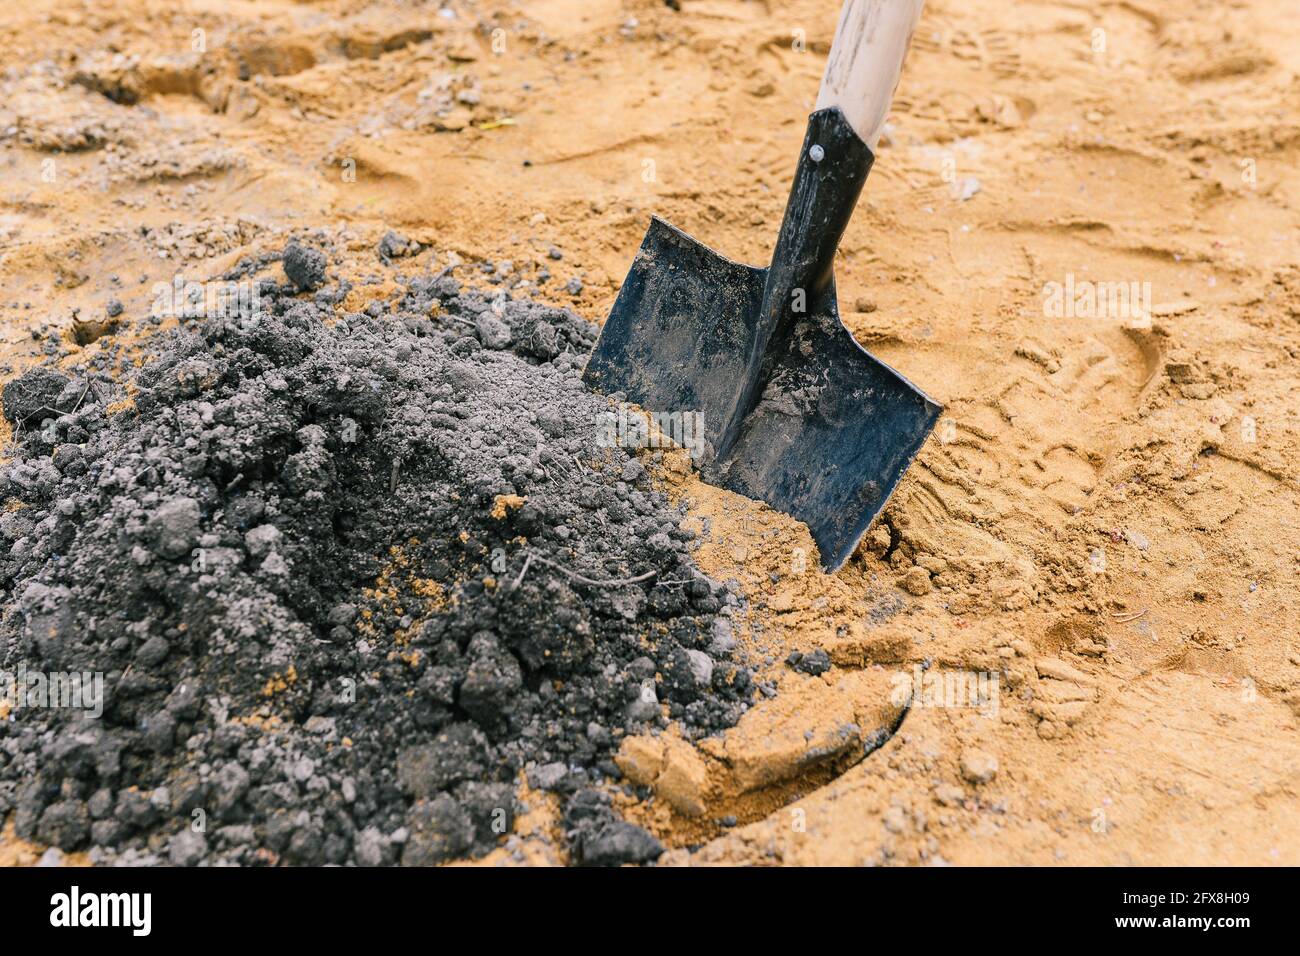 Black shovel in the sand. A tool for scooping up sand in construction work. Sand for construction and planting works. Stock Photo